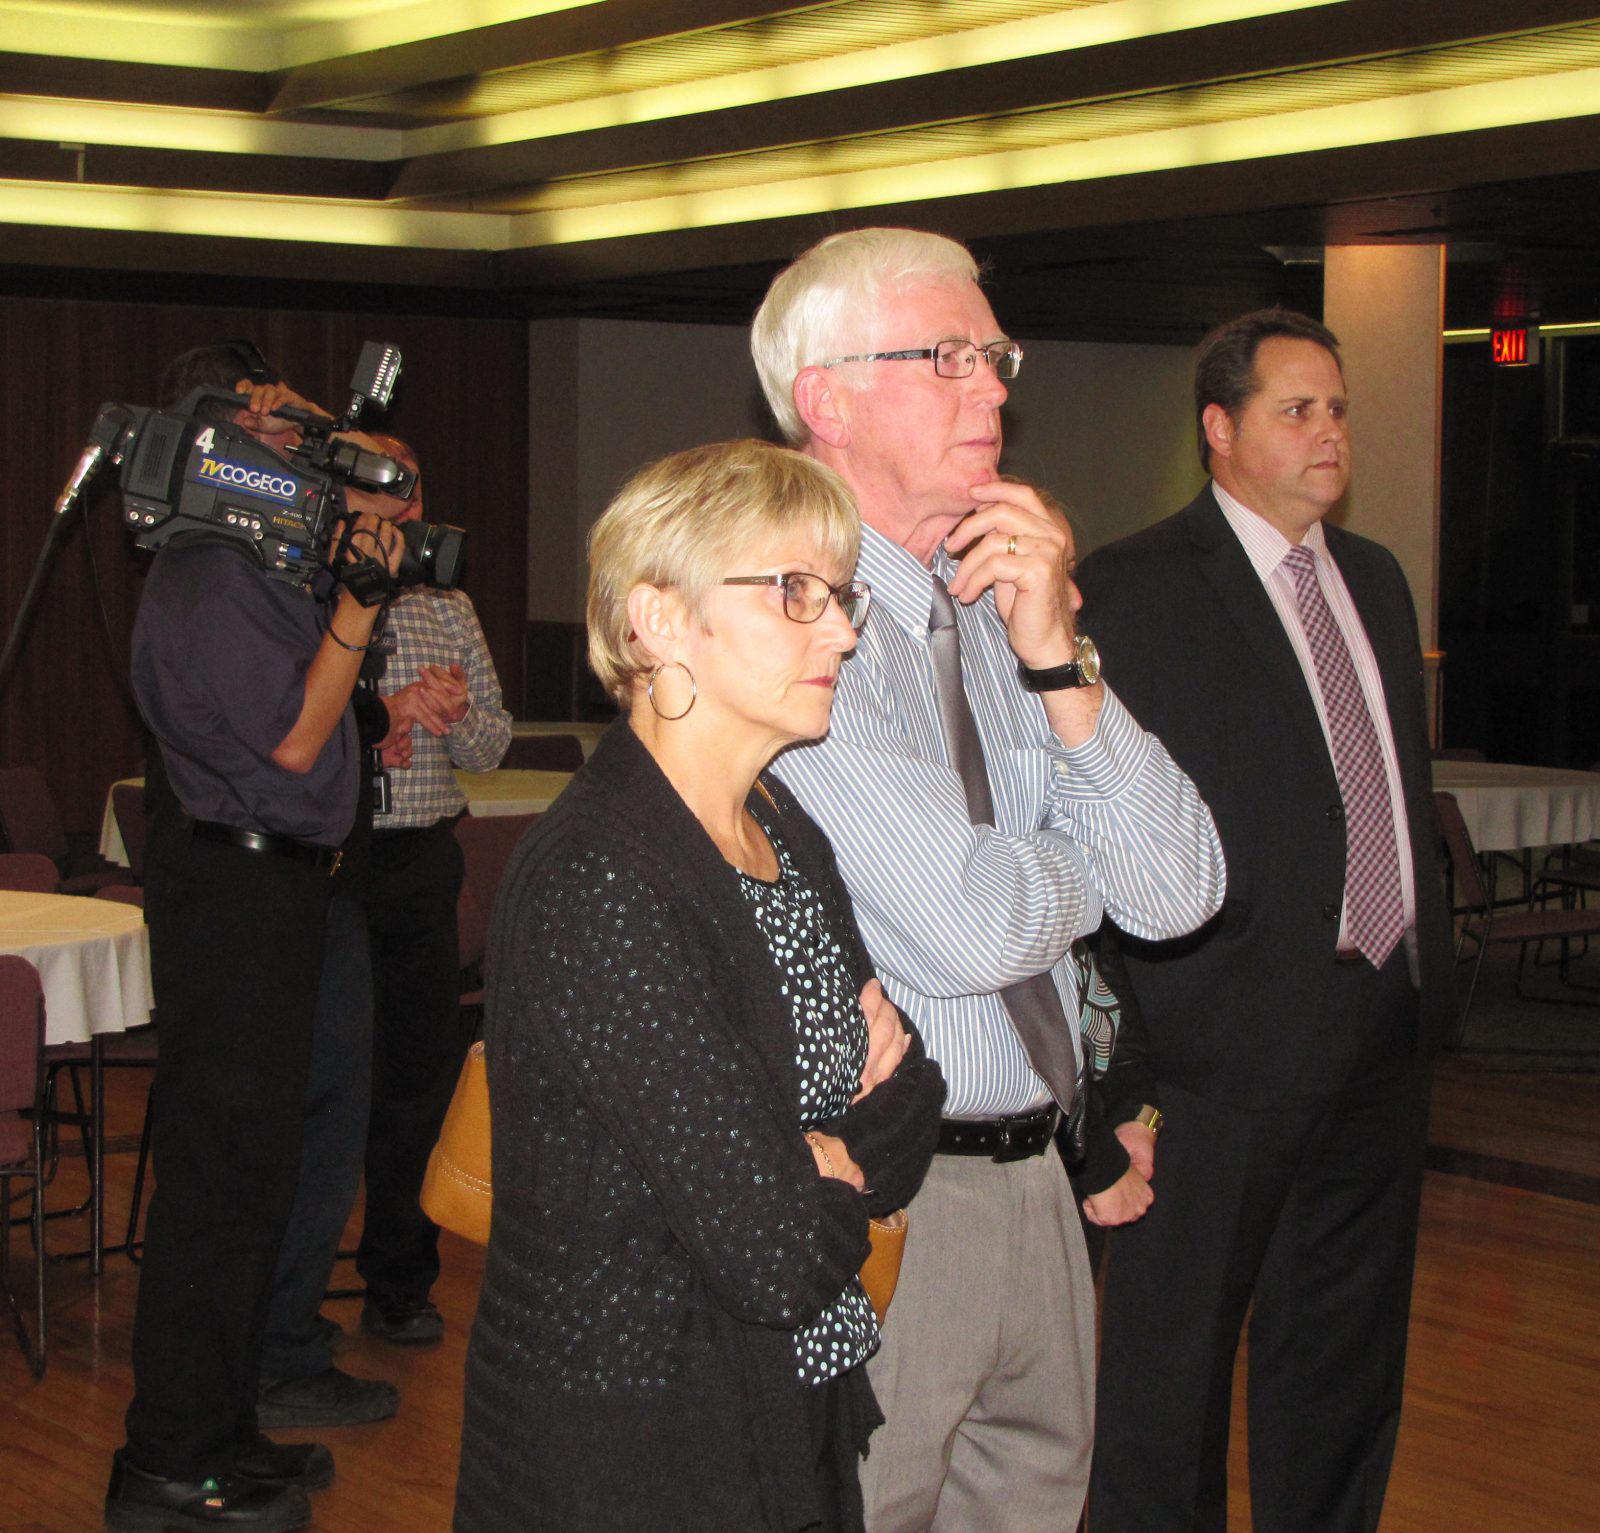 McDonald wins by a landslide in UCDSB election